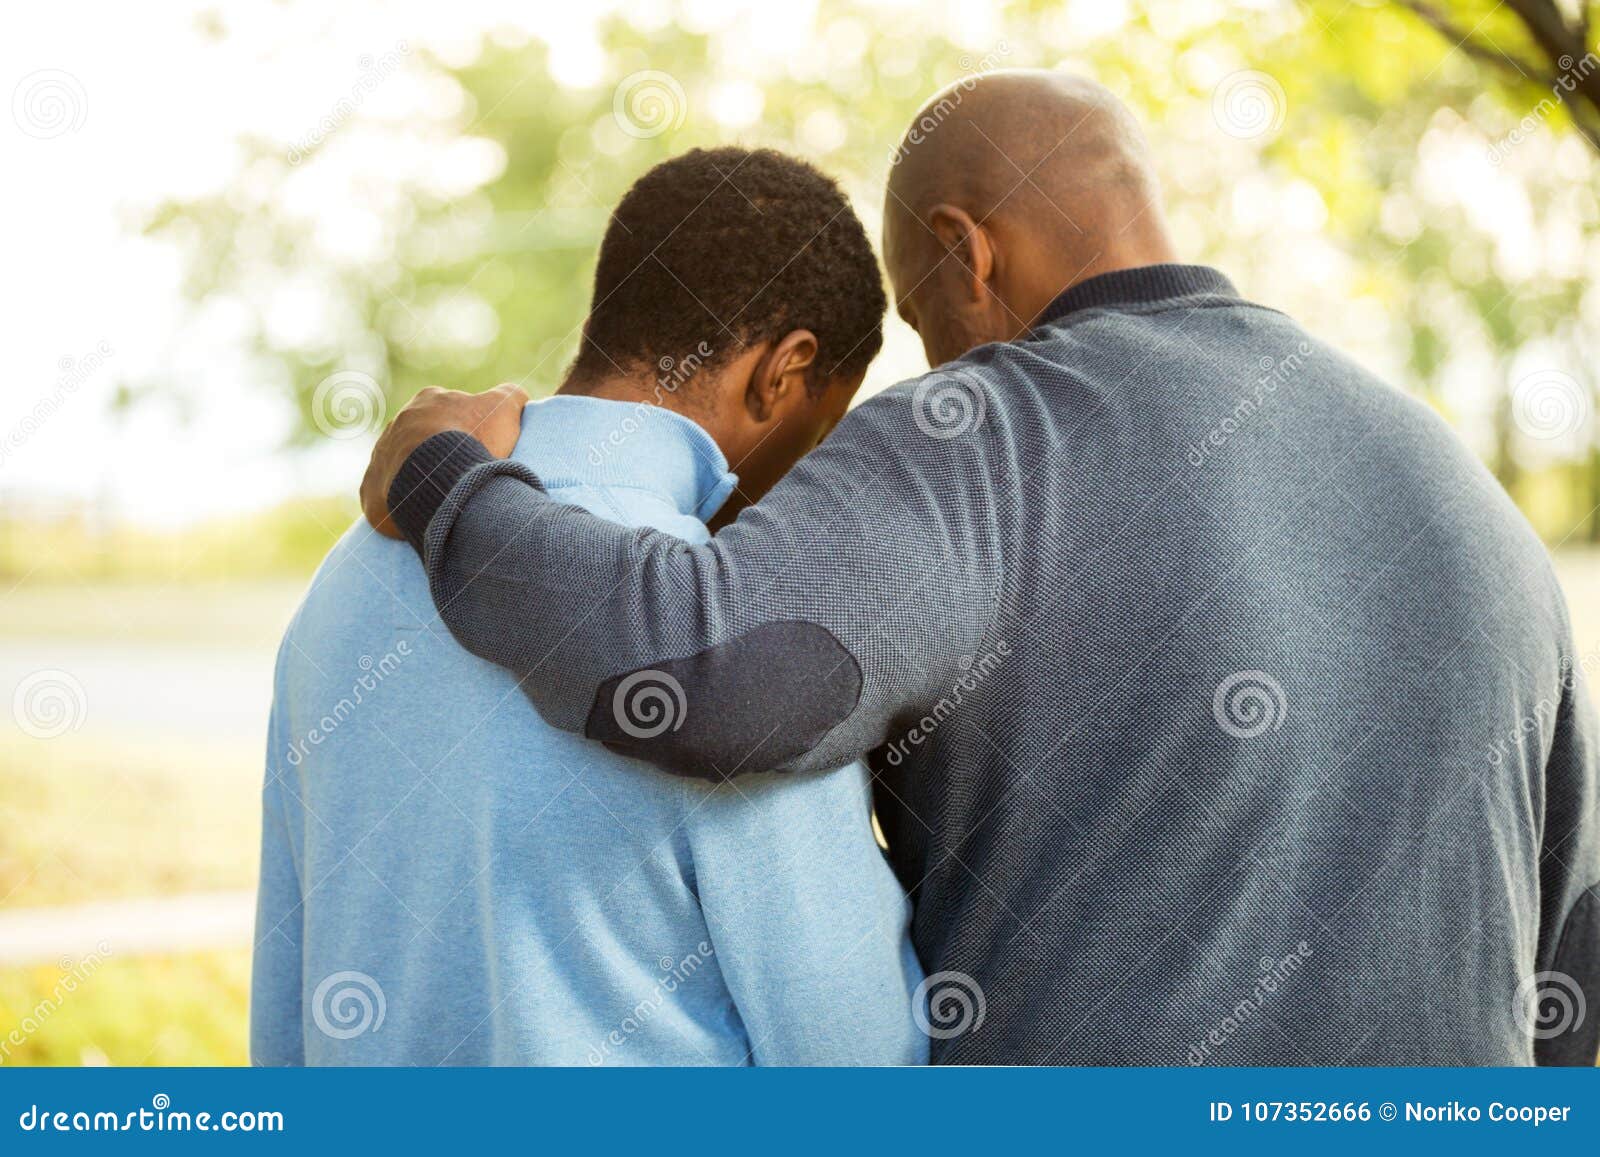 father talking and spending time with his son.